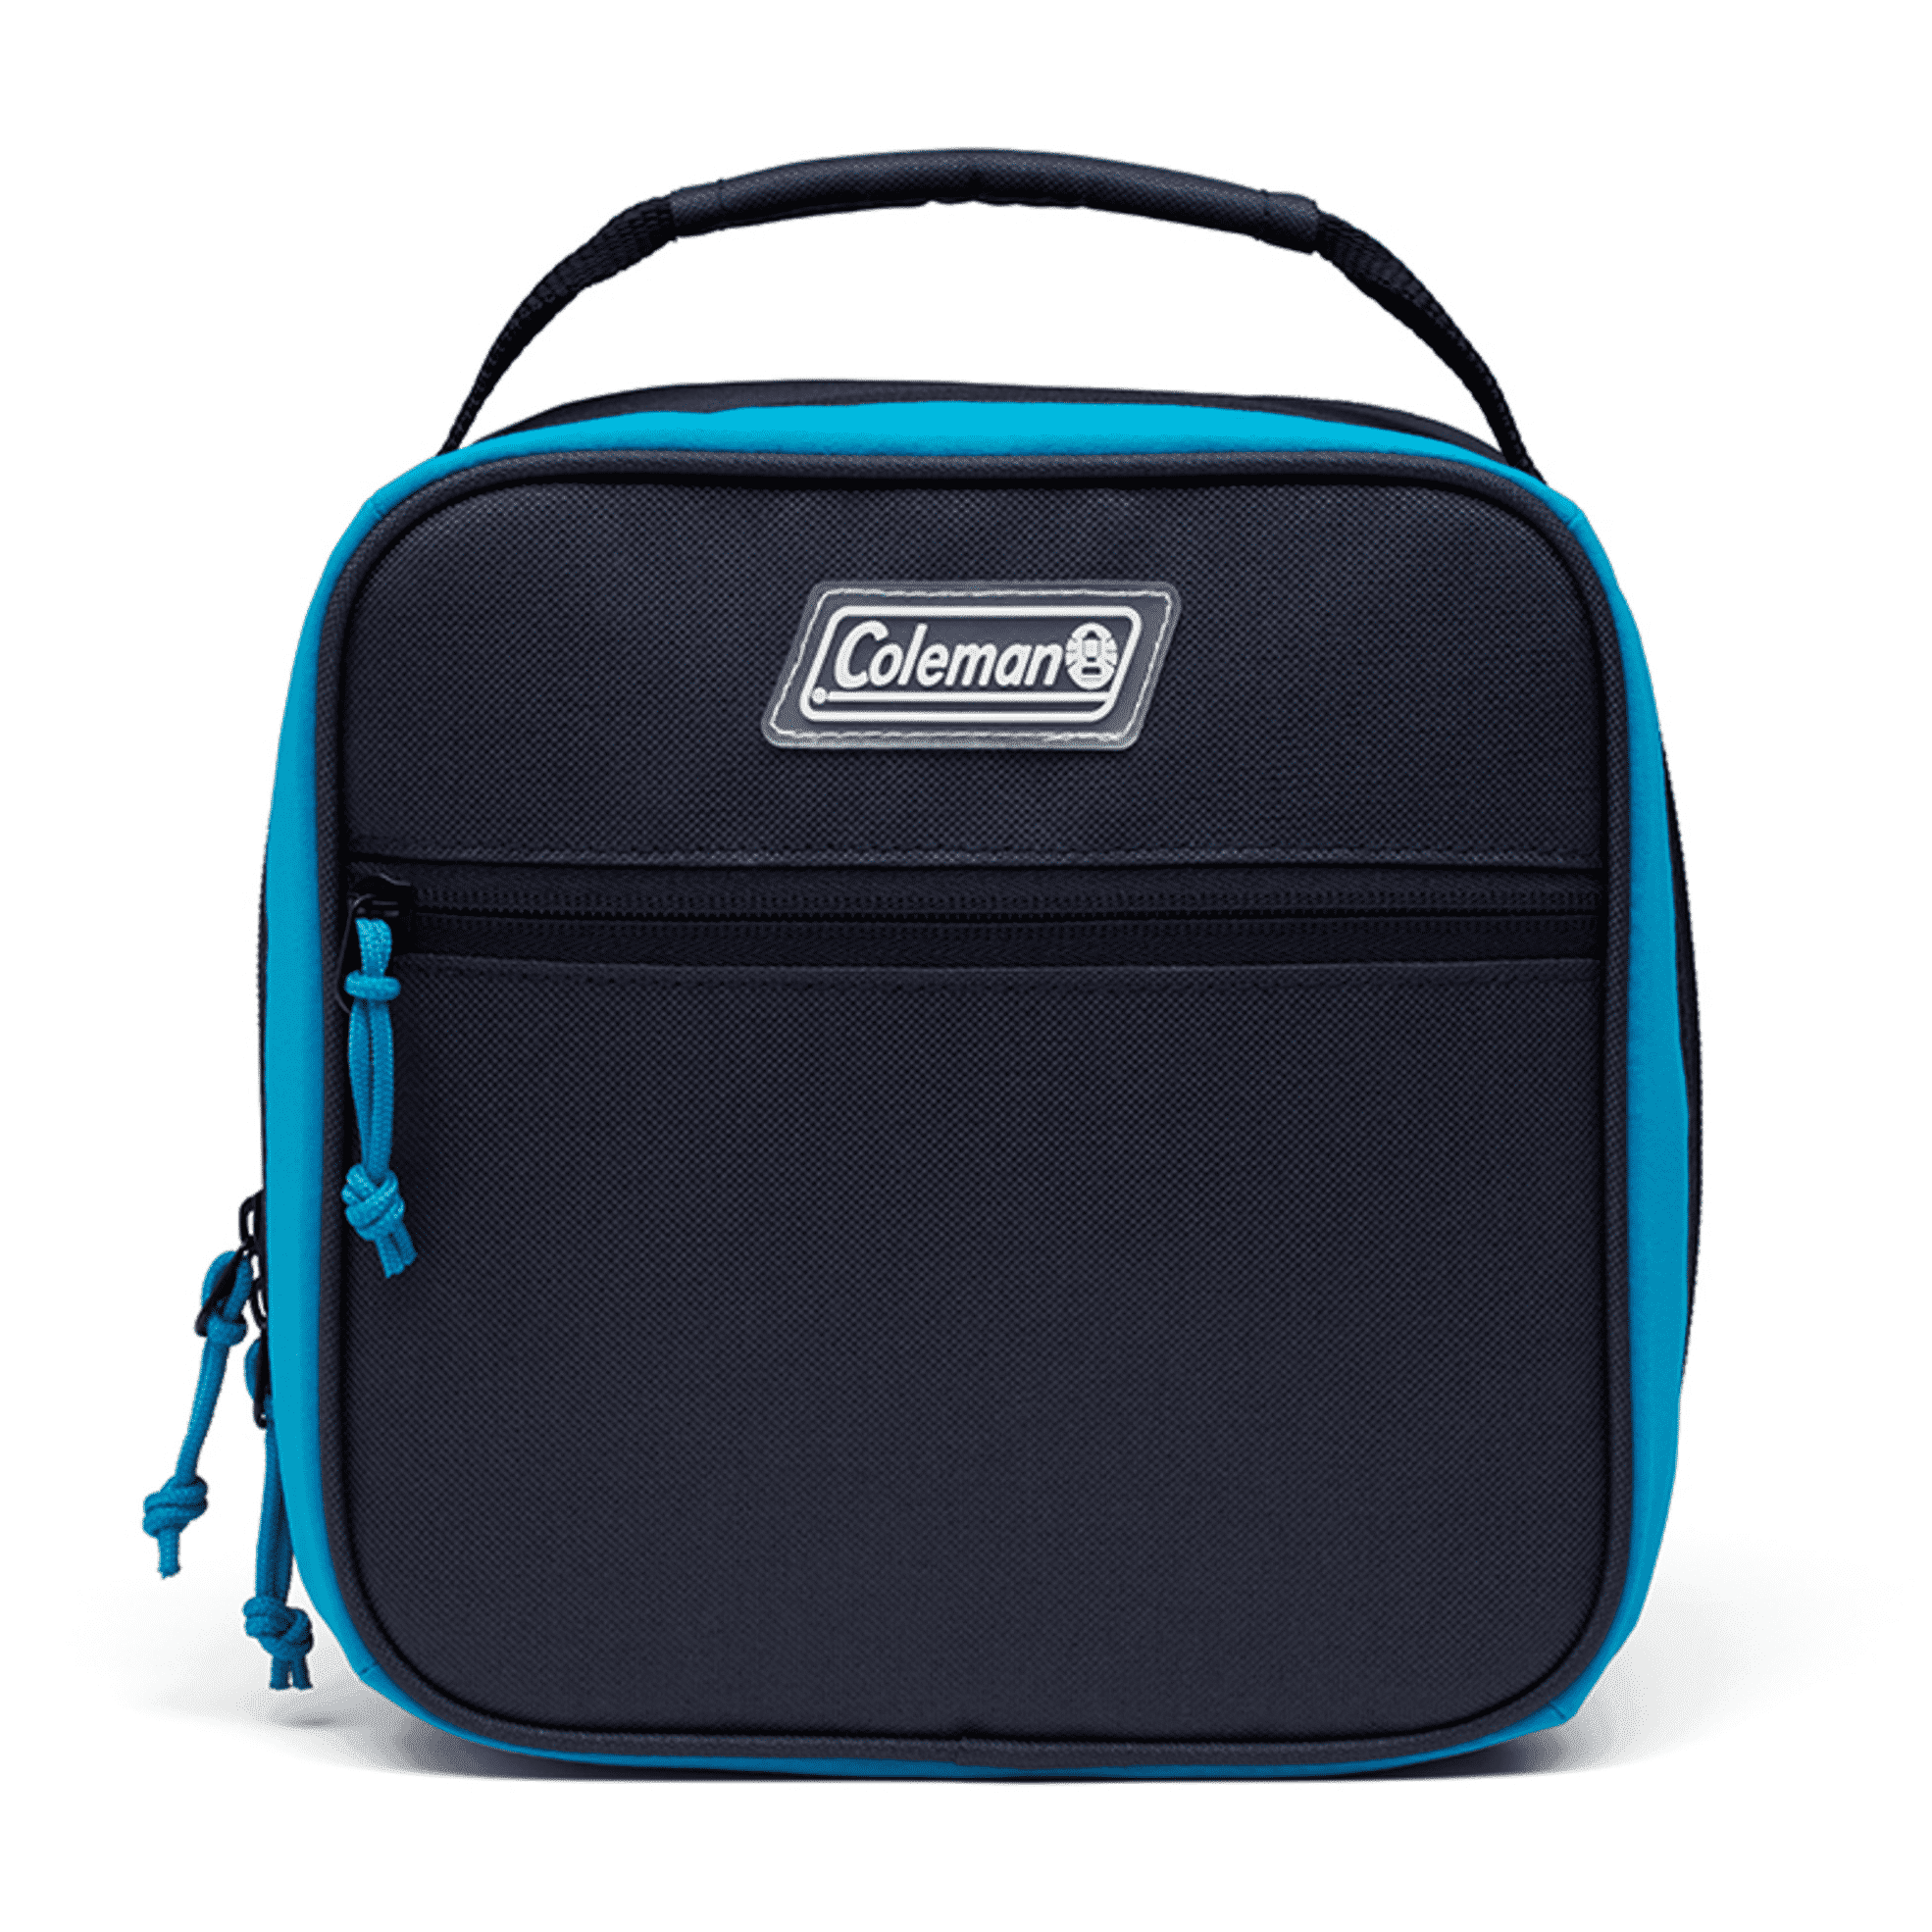 Coleman XPAND Insulated Soft Cooler Lunchbox 8" x 8.25" x 11.74", Blue